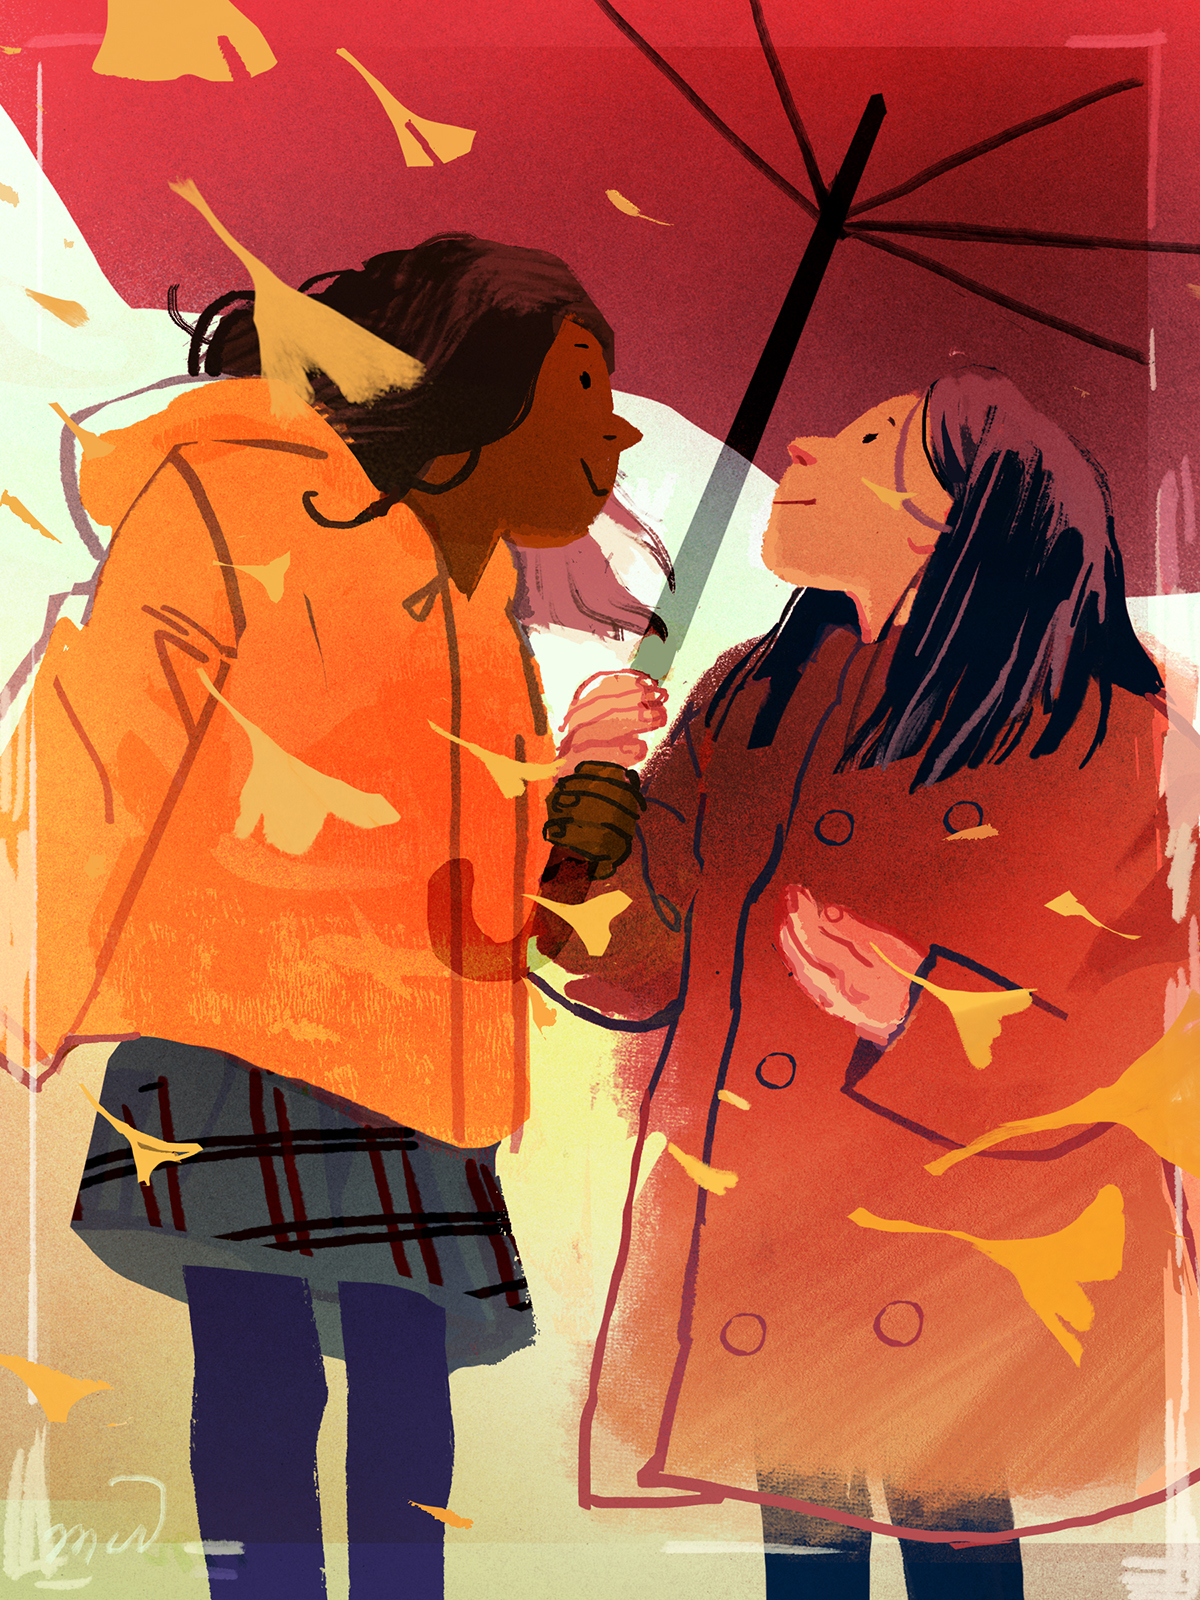 Cute illustration of young black girl and young white girl in a fall scene, sharing an umbrella